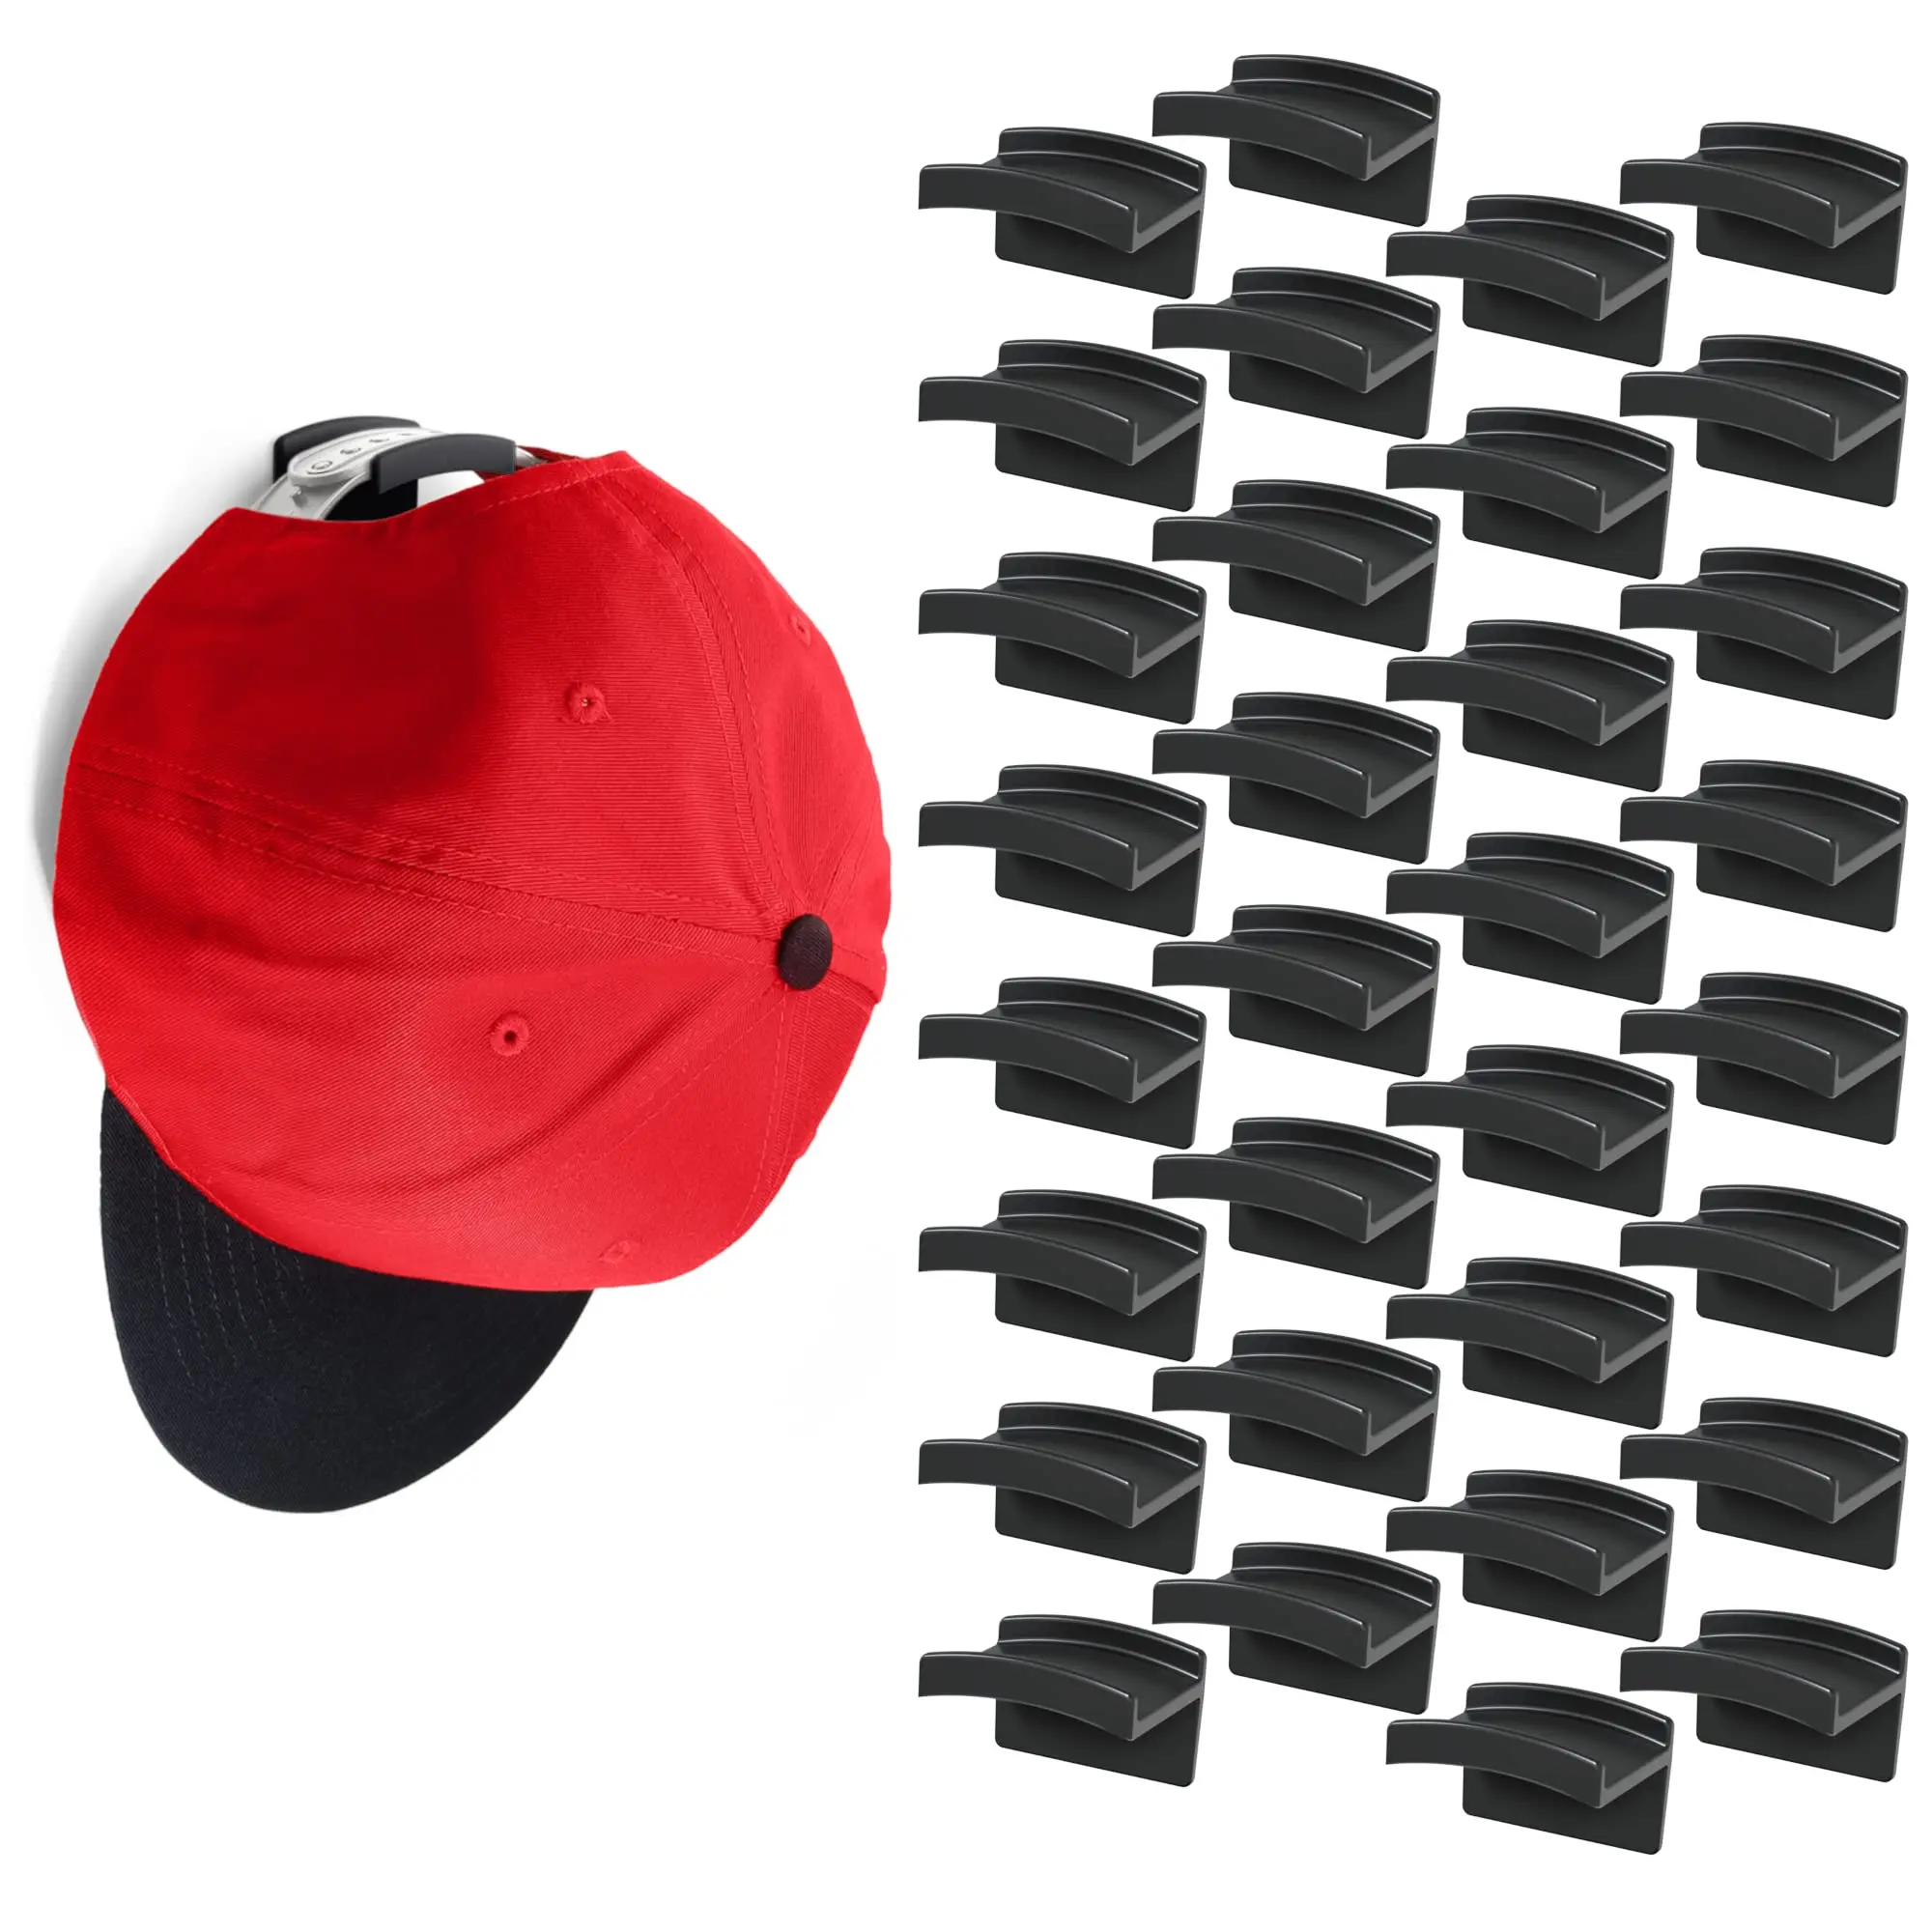 Holder Sticky Wall Mount Hook For Baseball Cap Casual Hat Storage Hook Free-punch Paste Portable Door Closet Hanger